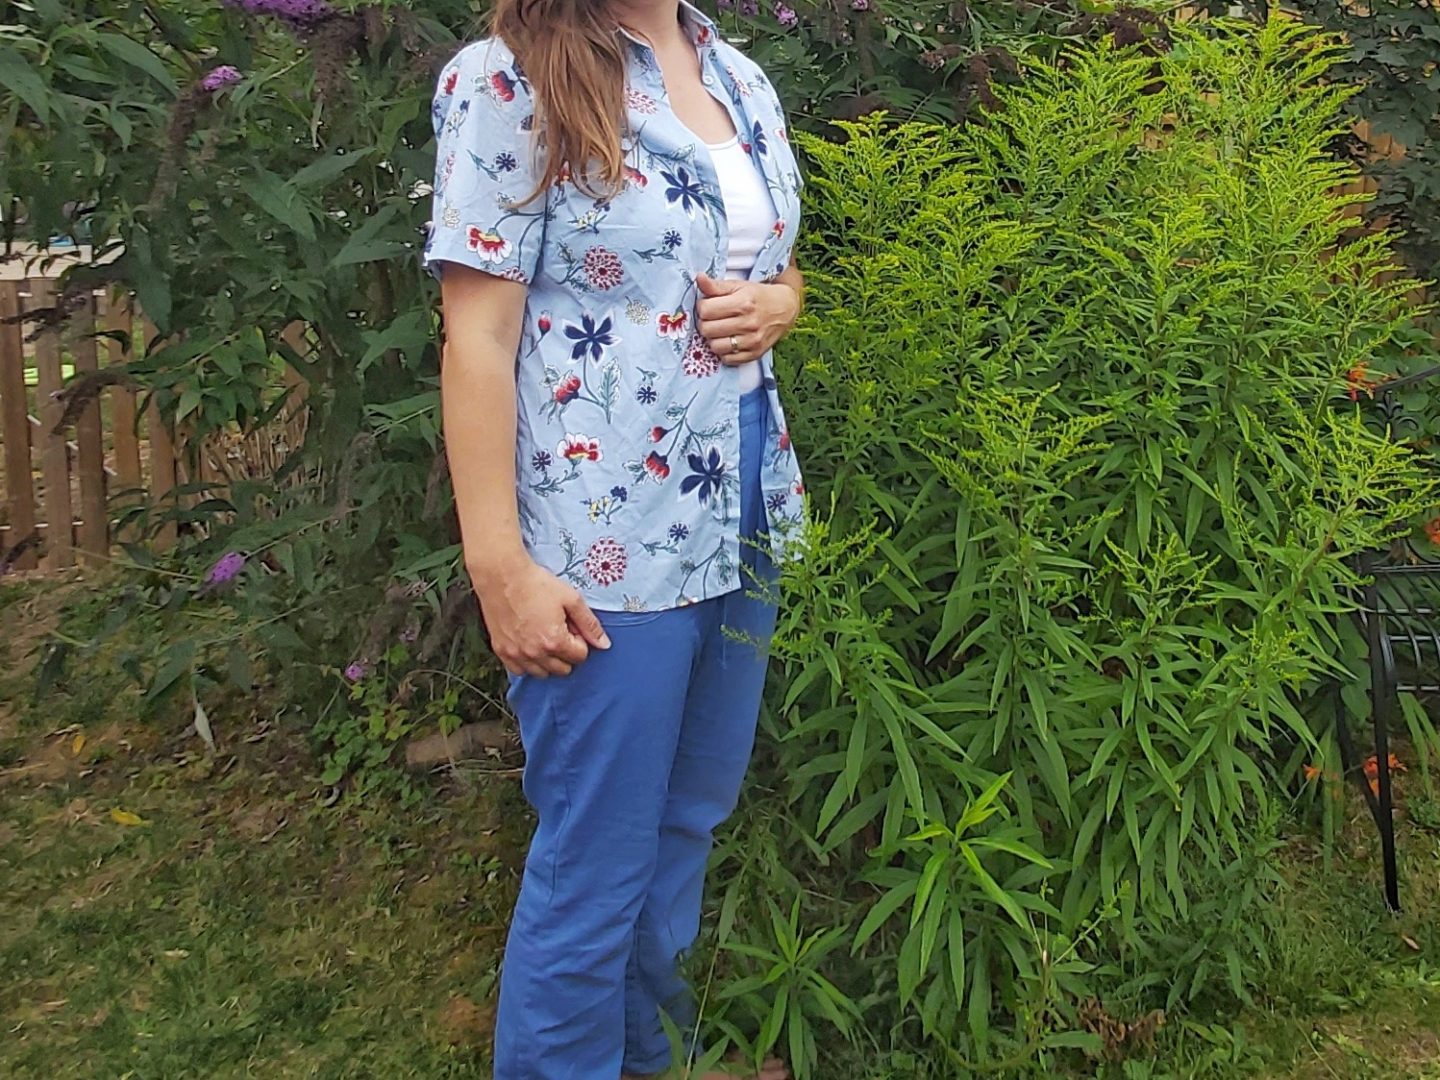 Adult female pictured from the neck down wearing shirt and bright blue trousers standing beside a green bush